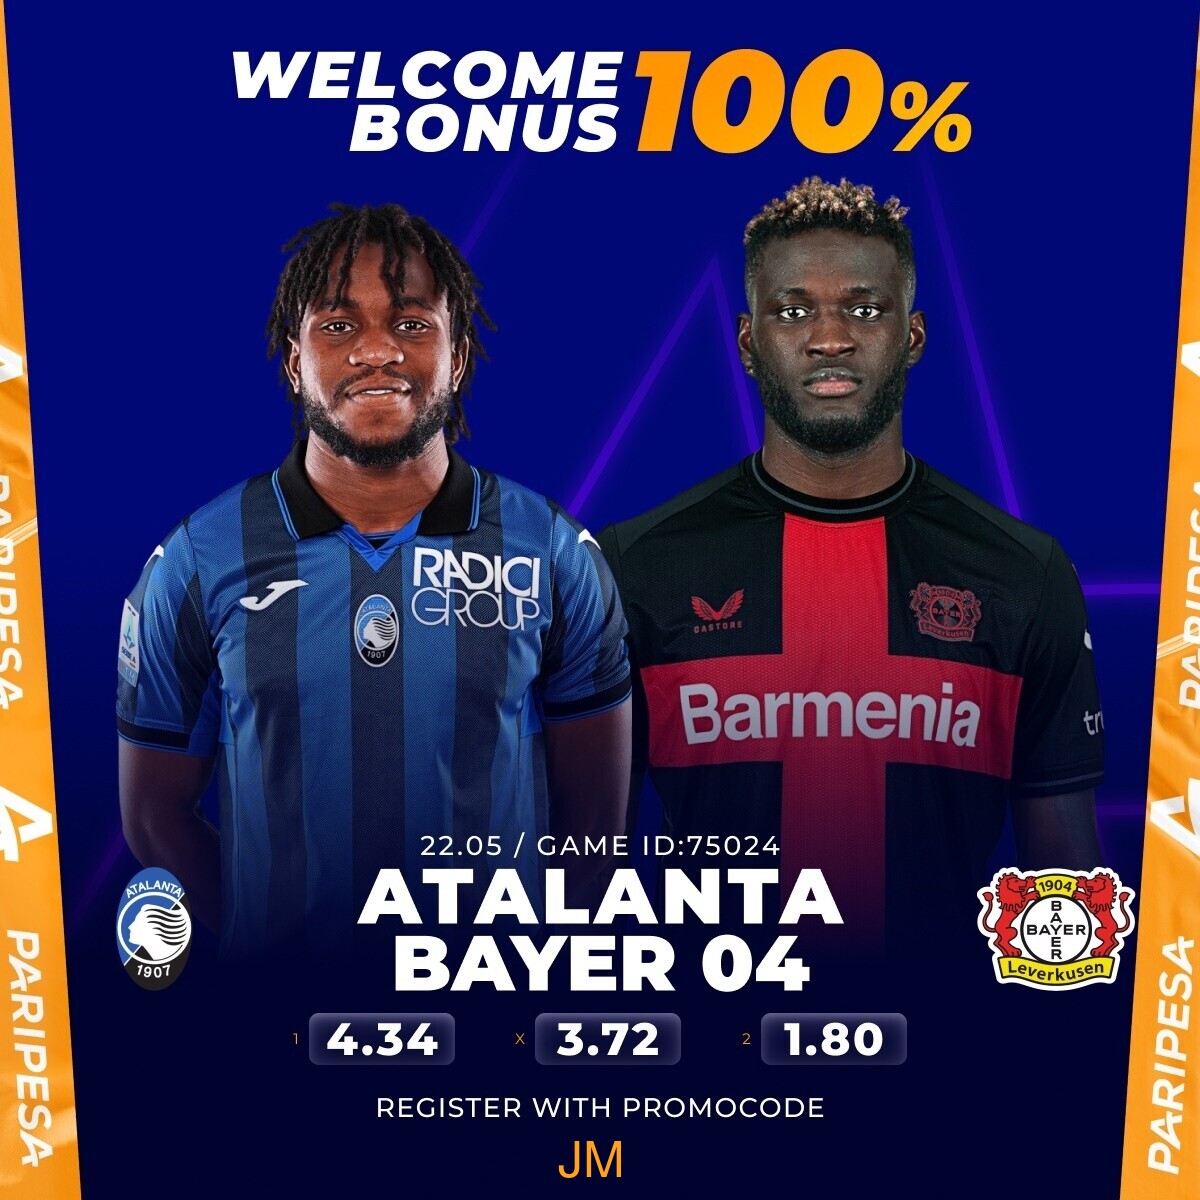 Bayer Leverkusen is just one step away from an 'Invincible treble' as they face Atalanta in the Europa League final Will they win today? Join us in Paripesa today Kama hauna account, Register 📲 ln.run/O5XVG PromoCode ➡ JM to get the welcome bonus Steve Harvey